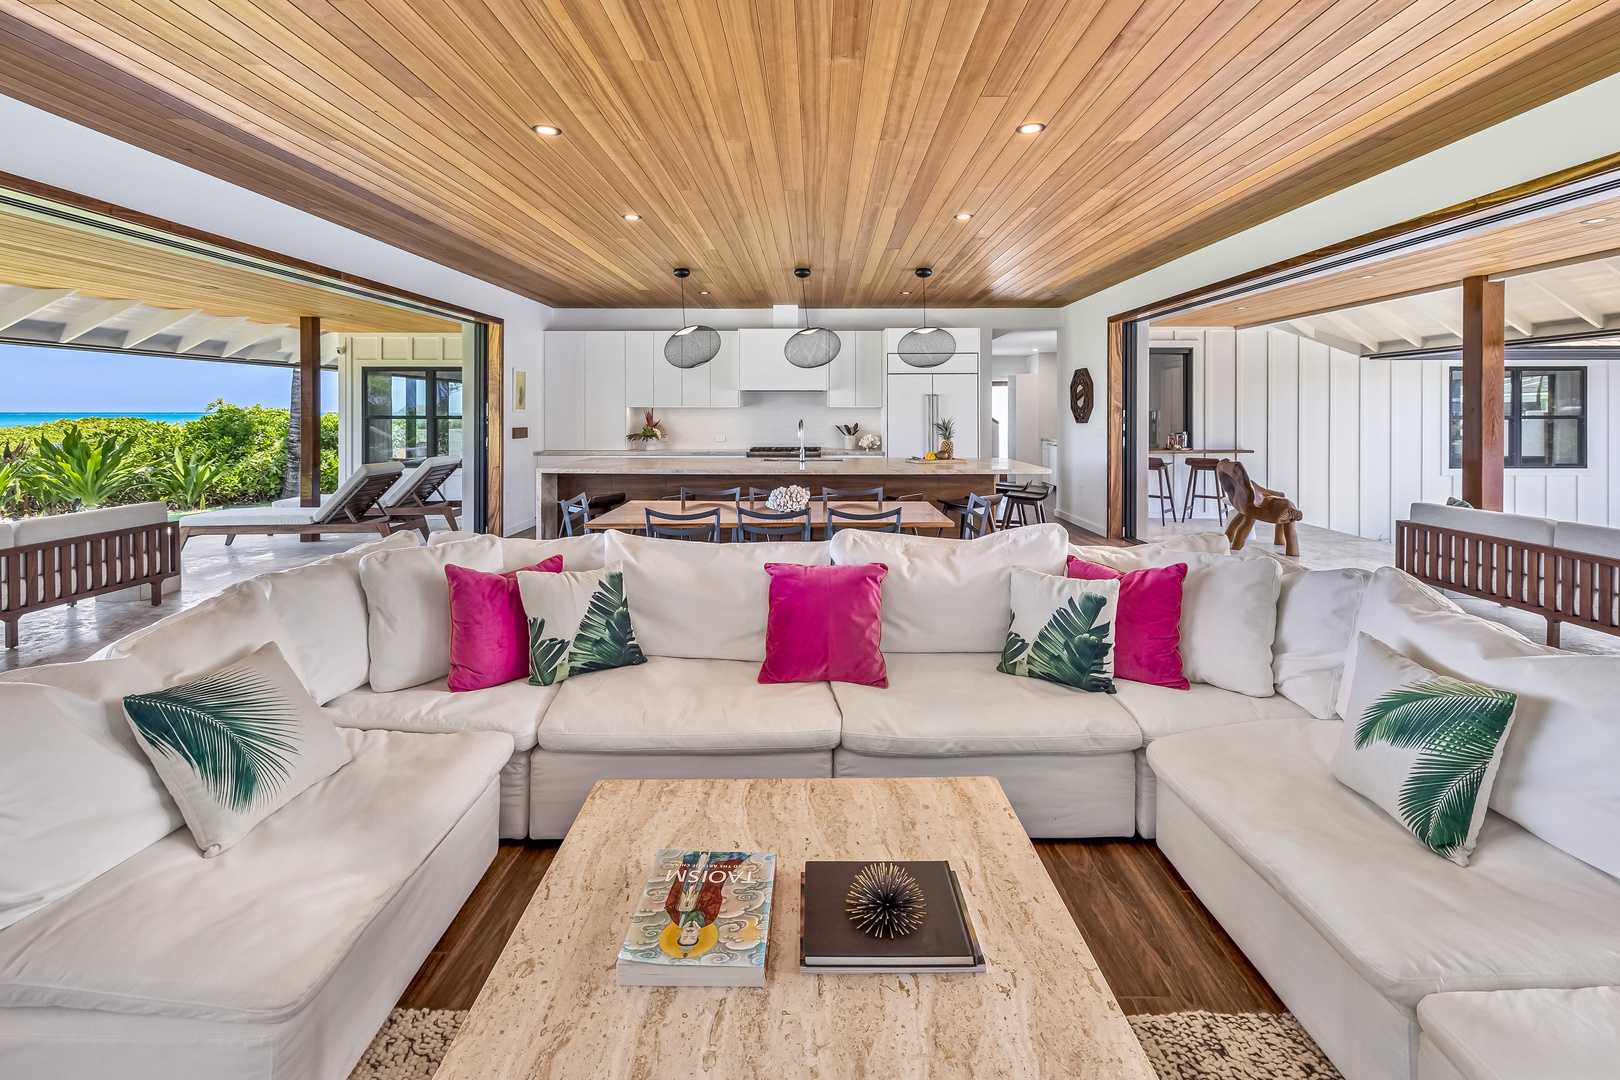 Kailua Vacation Rentals, Kailua Beach Villa - The expansive common areas and open flow provide a setting of relaxed luxury, perfect for all types of Gathering.